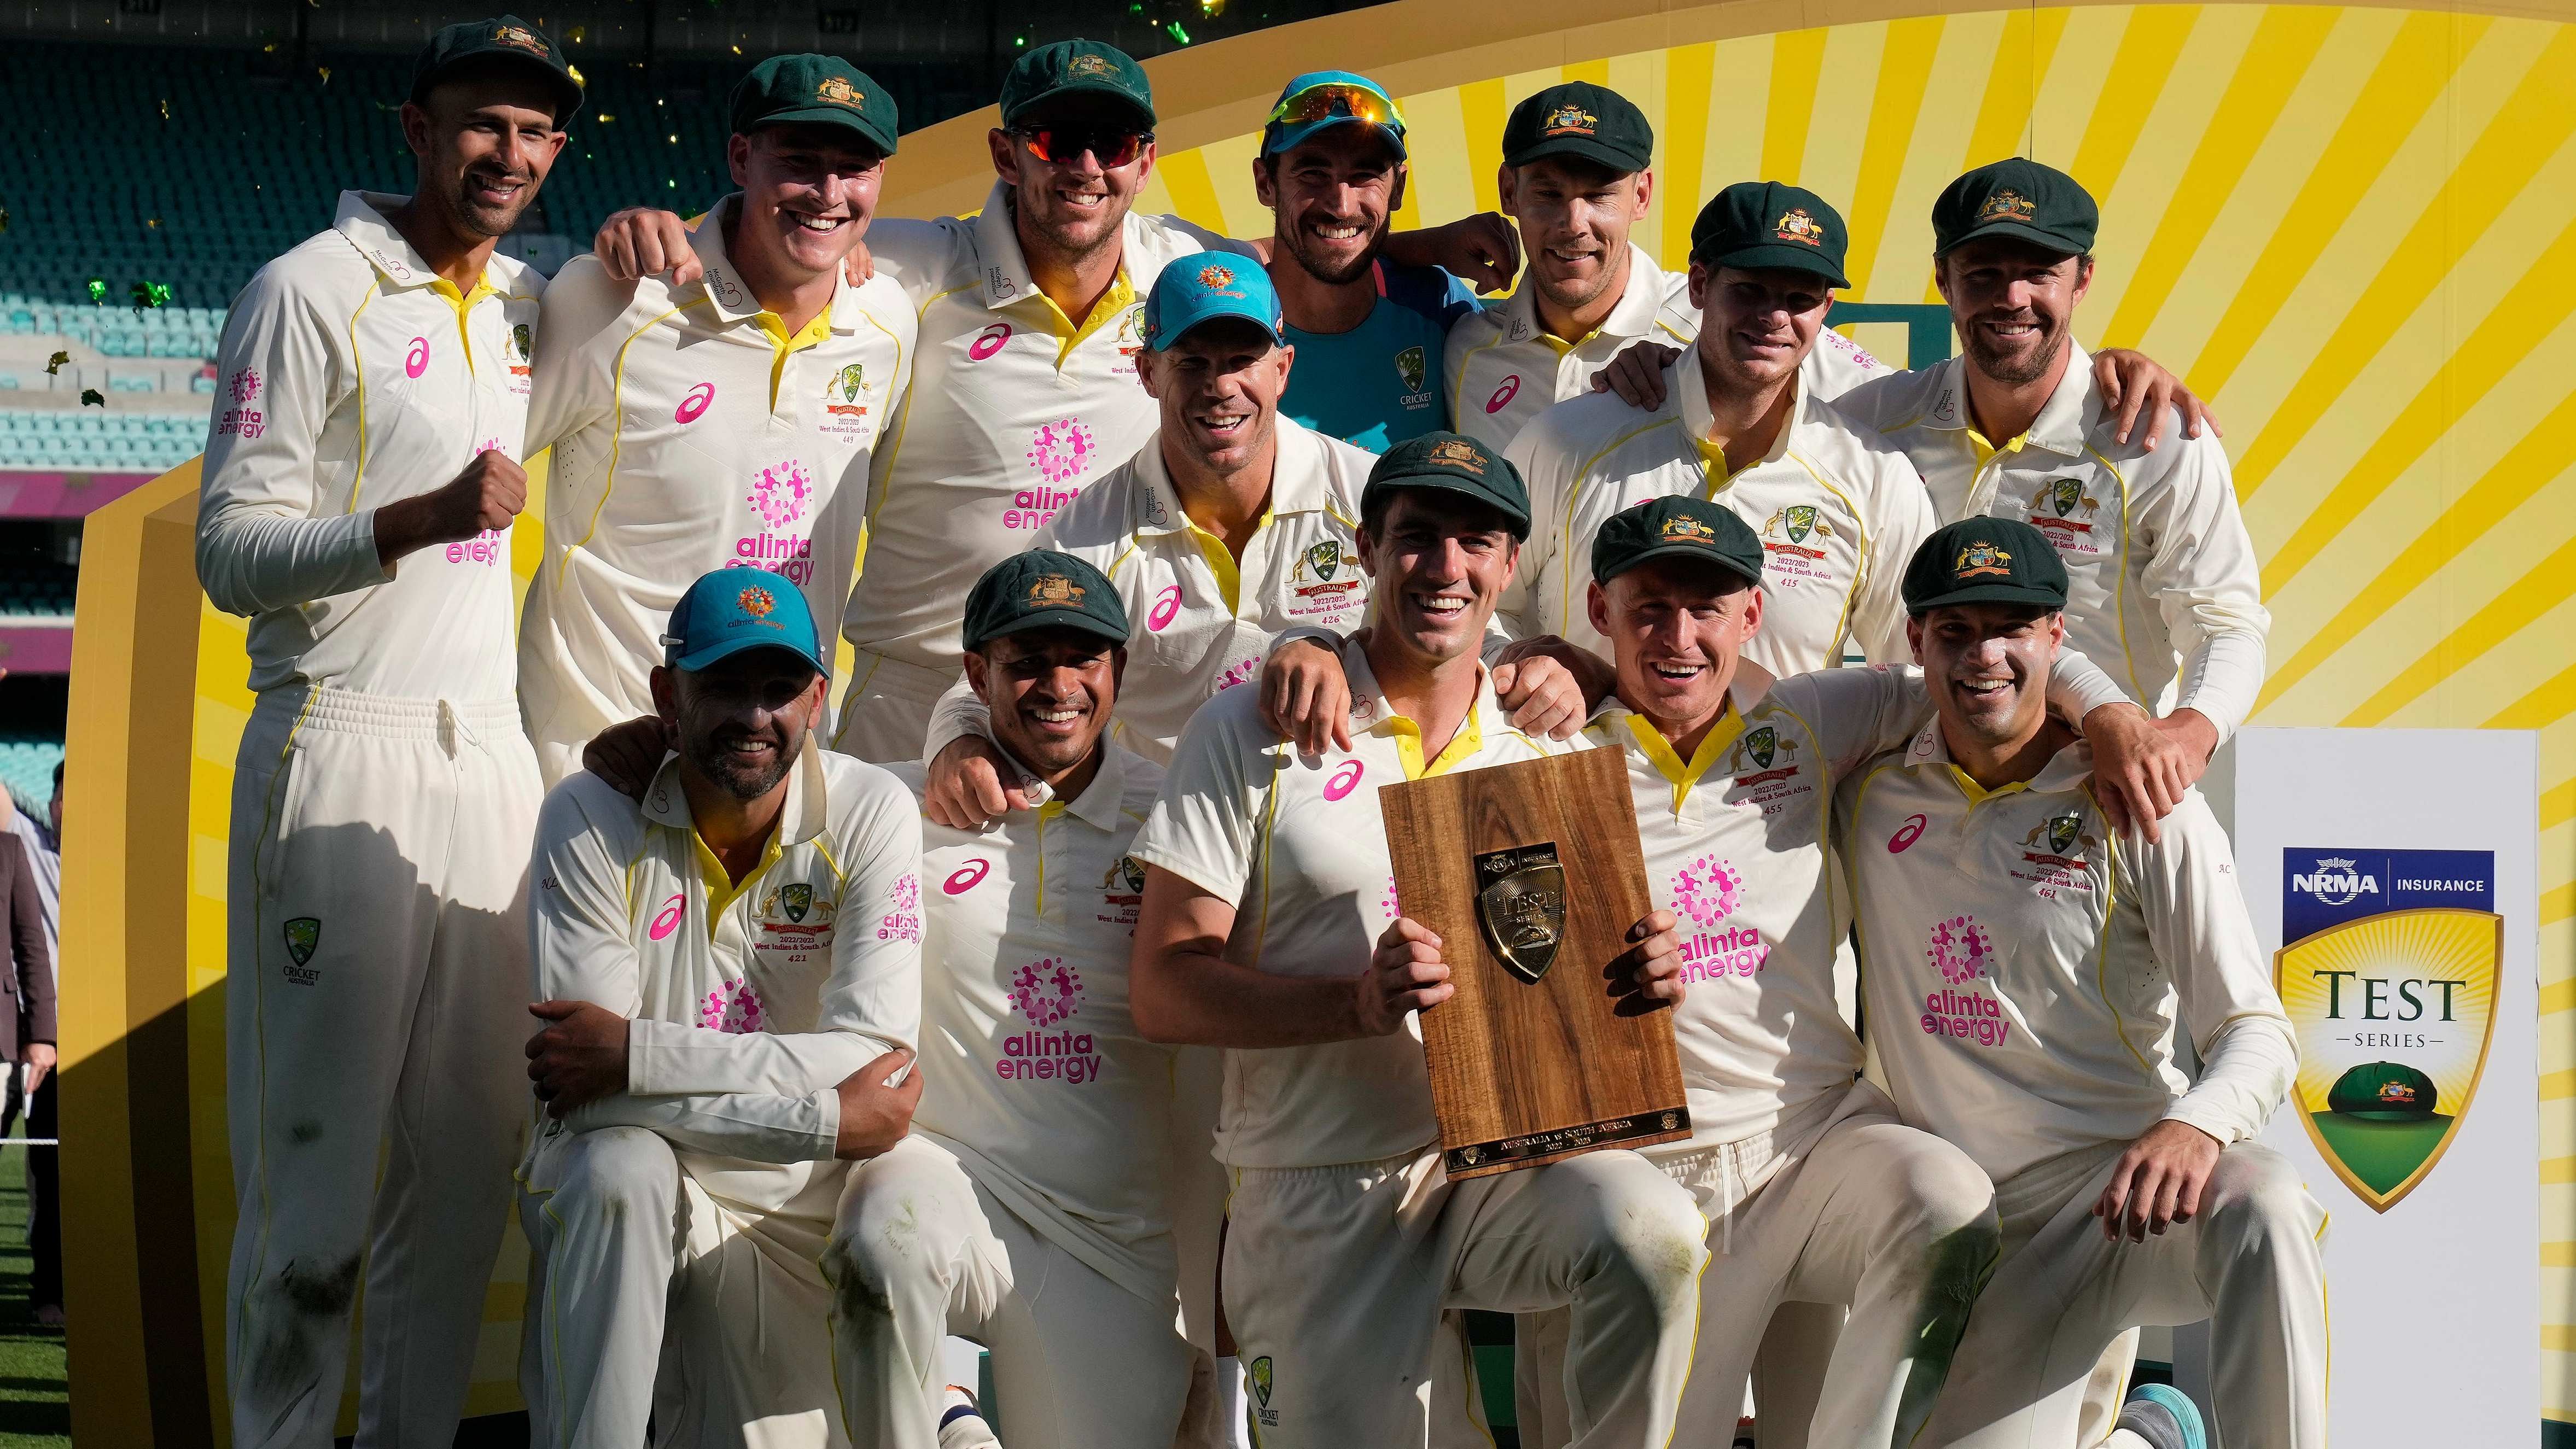 The Australian team poses with their trophy at the end of their cricket test match against South Africa at the Sydney Cricket Ground in Sydney, Sunday, Jan. 8, 2023. The match ended in a draw and Australia won the series 2-0. AP/PTI